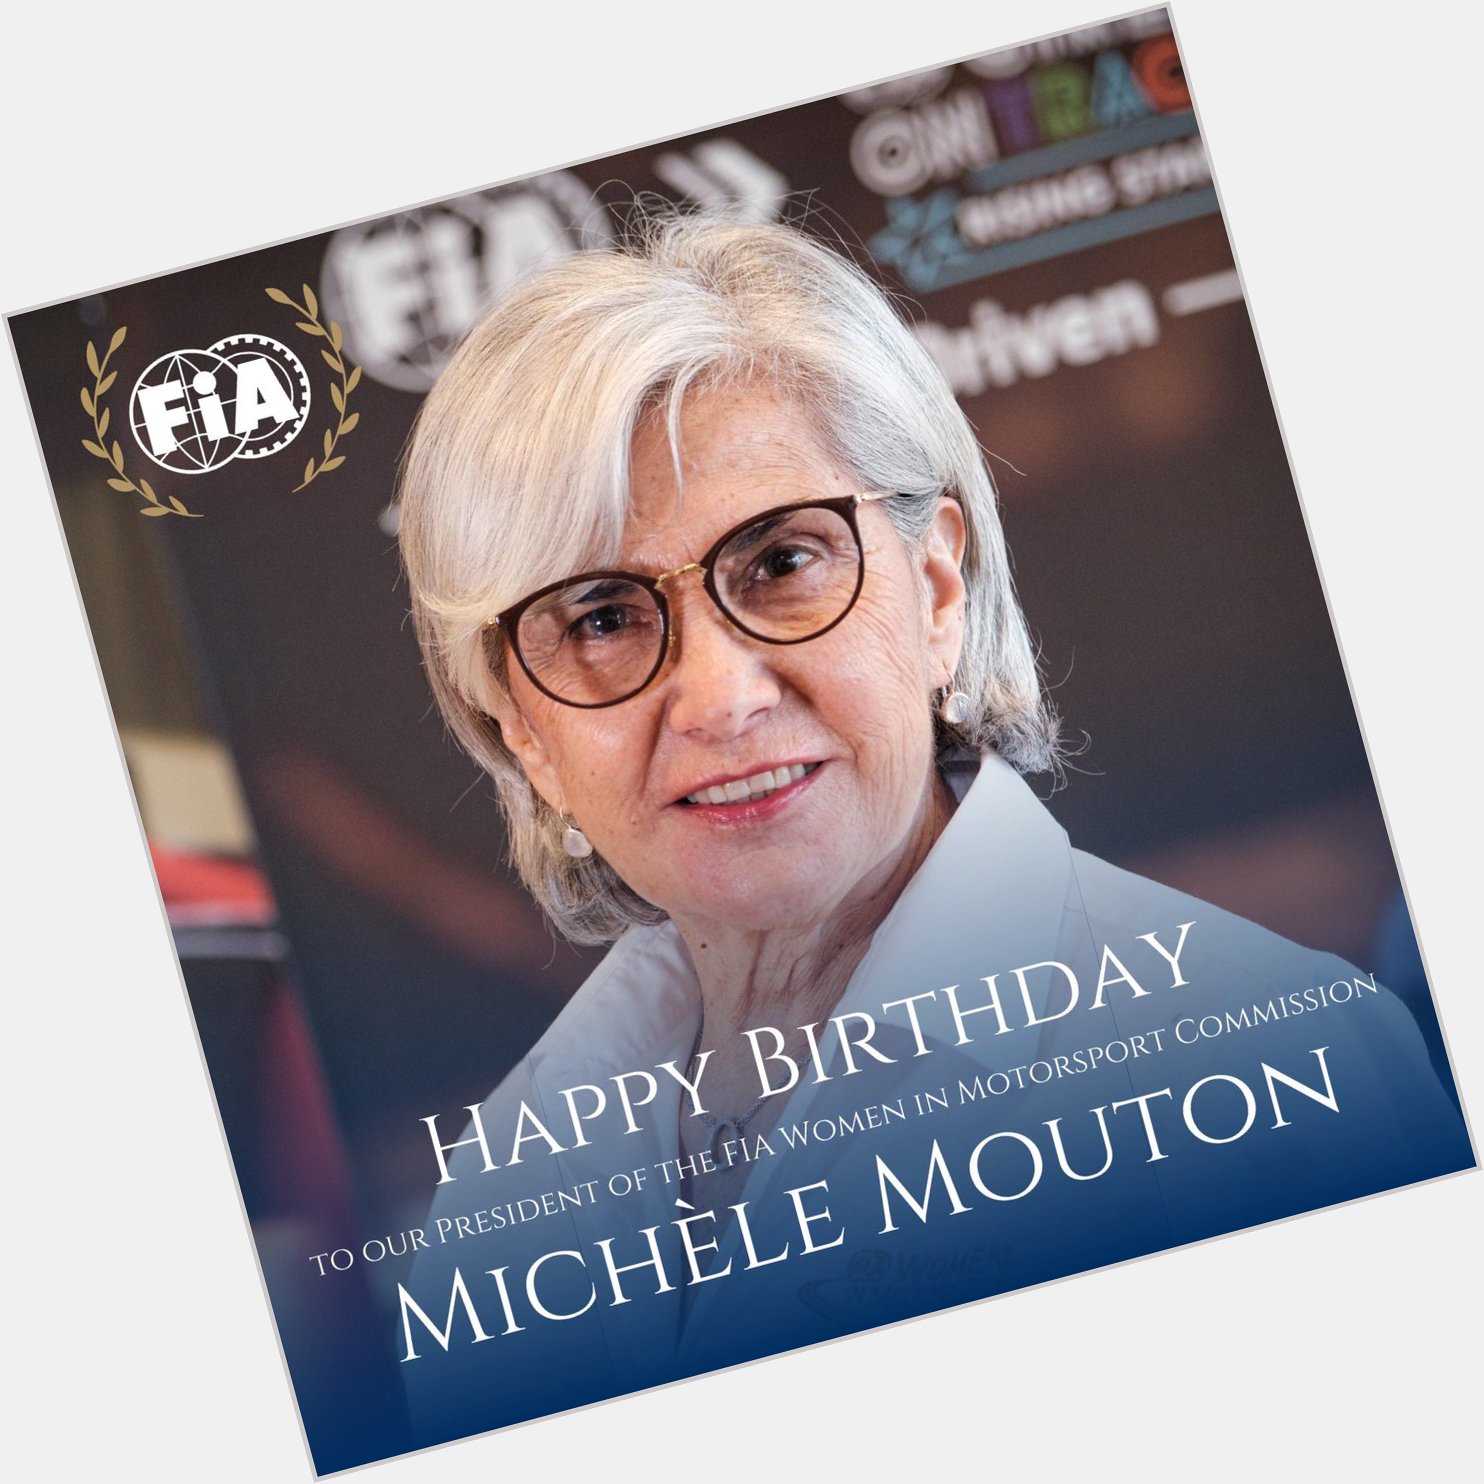 The entire family wishes Michèle Mouton, President of the Commission and Rally legend, a happy birthday 